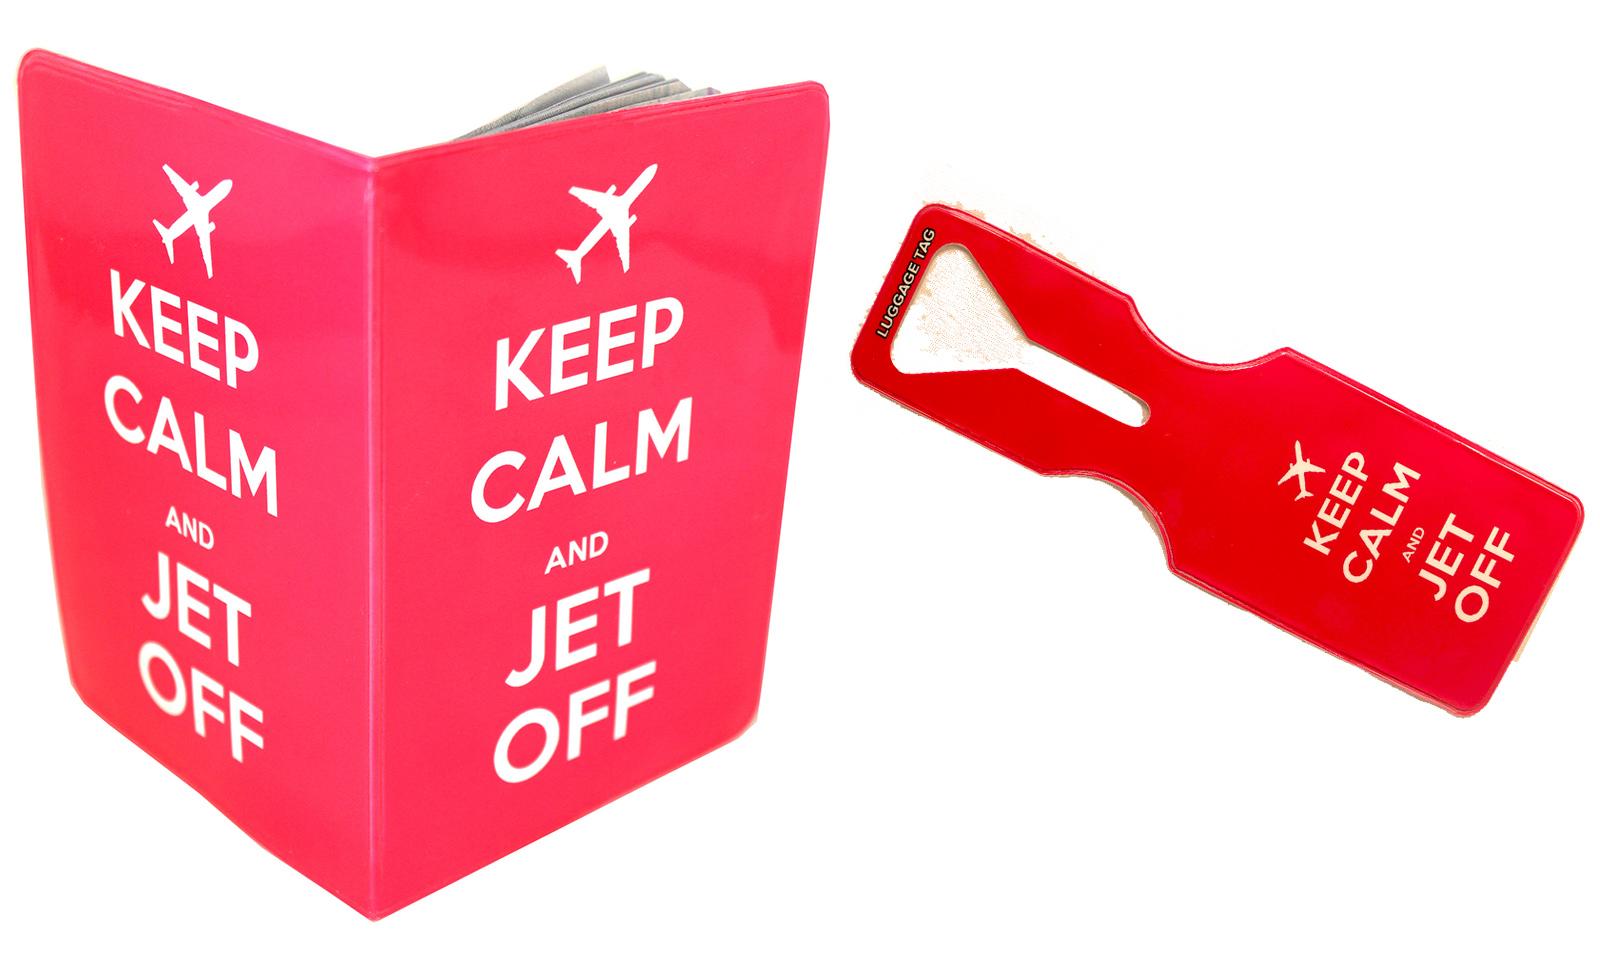 Keep Calm Jet Off Pink Passport Cover and Luggage Tag Set